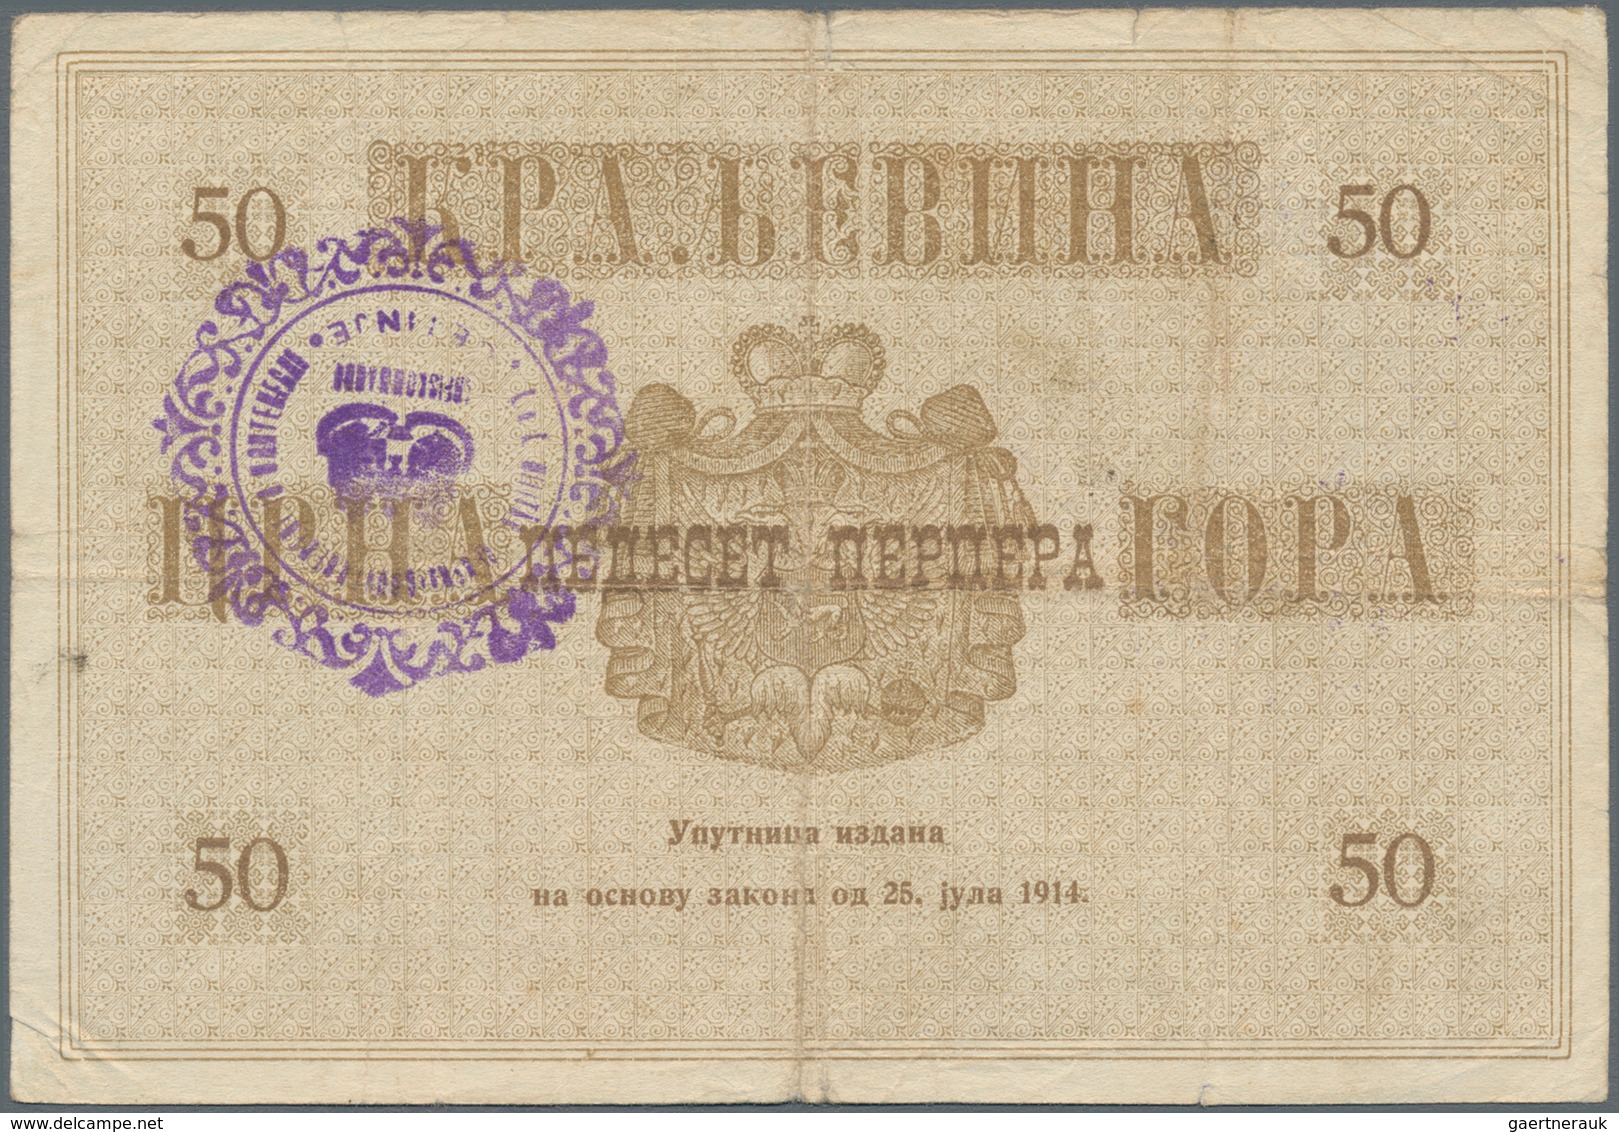 Montenegro: Military Government District Command set with 9 banknotes of the 1914 (1916) handstamped